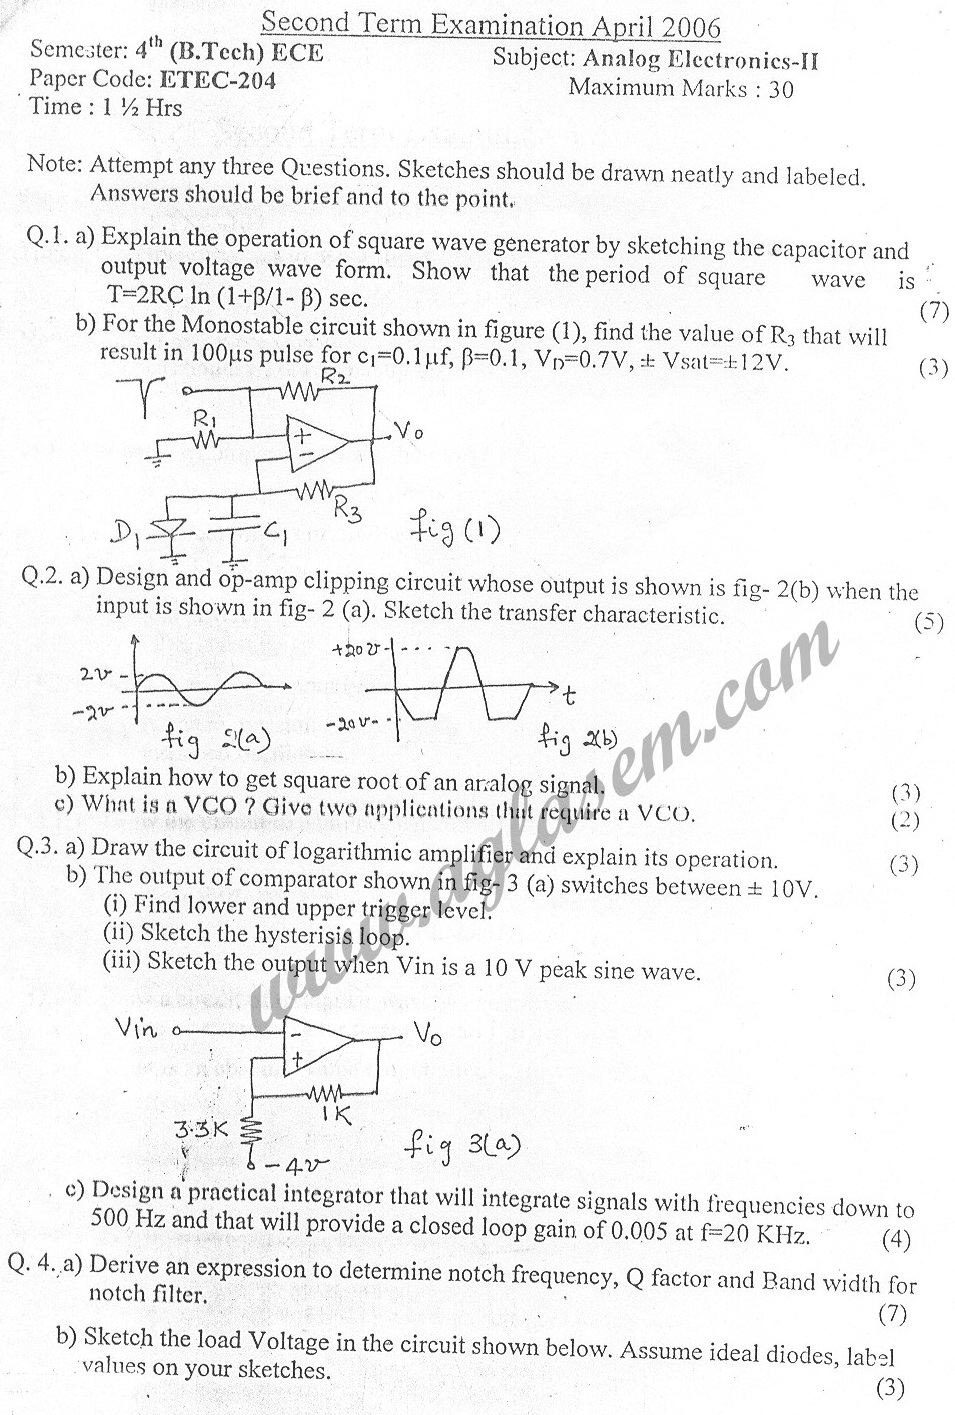 GGSIPU Question Papers Fourth Semester – Second Term 2006 – ETEC-204